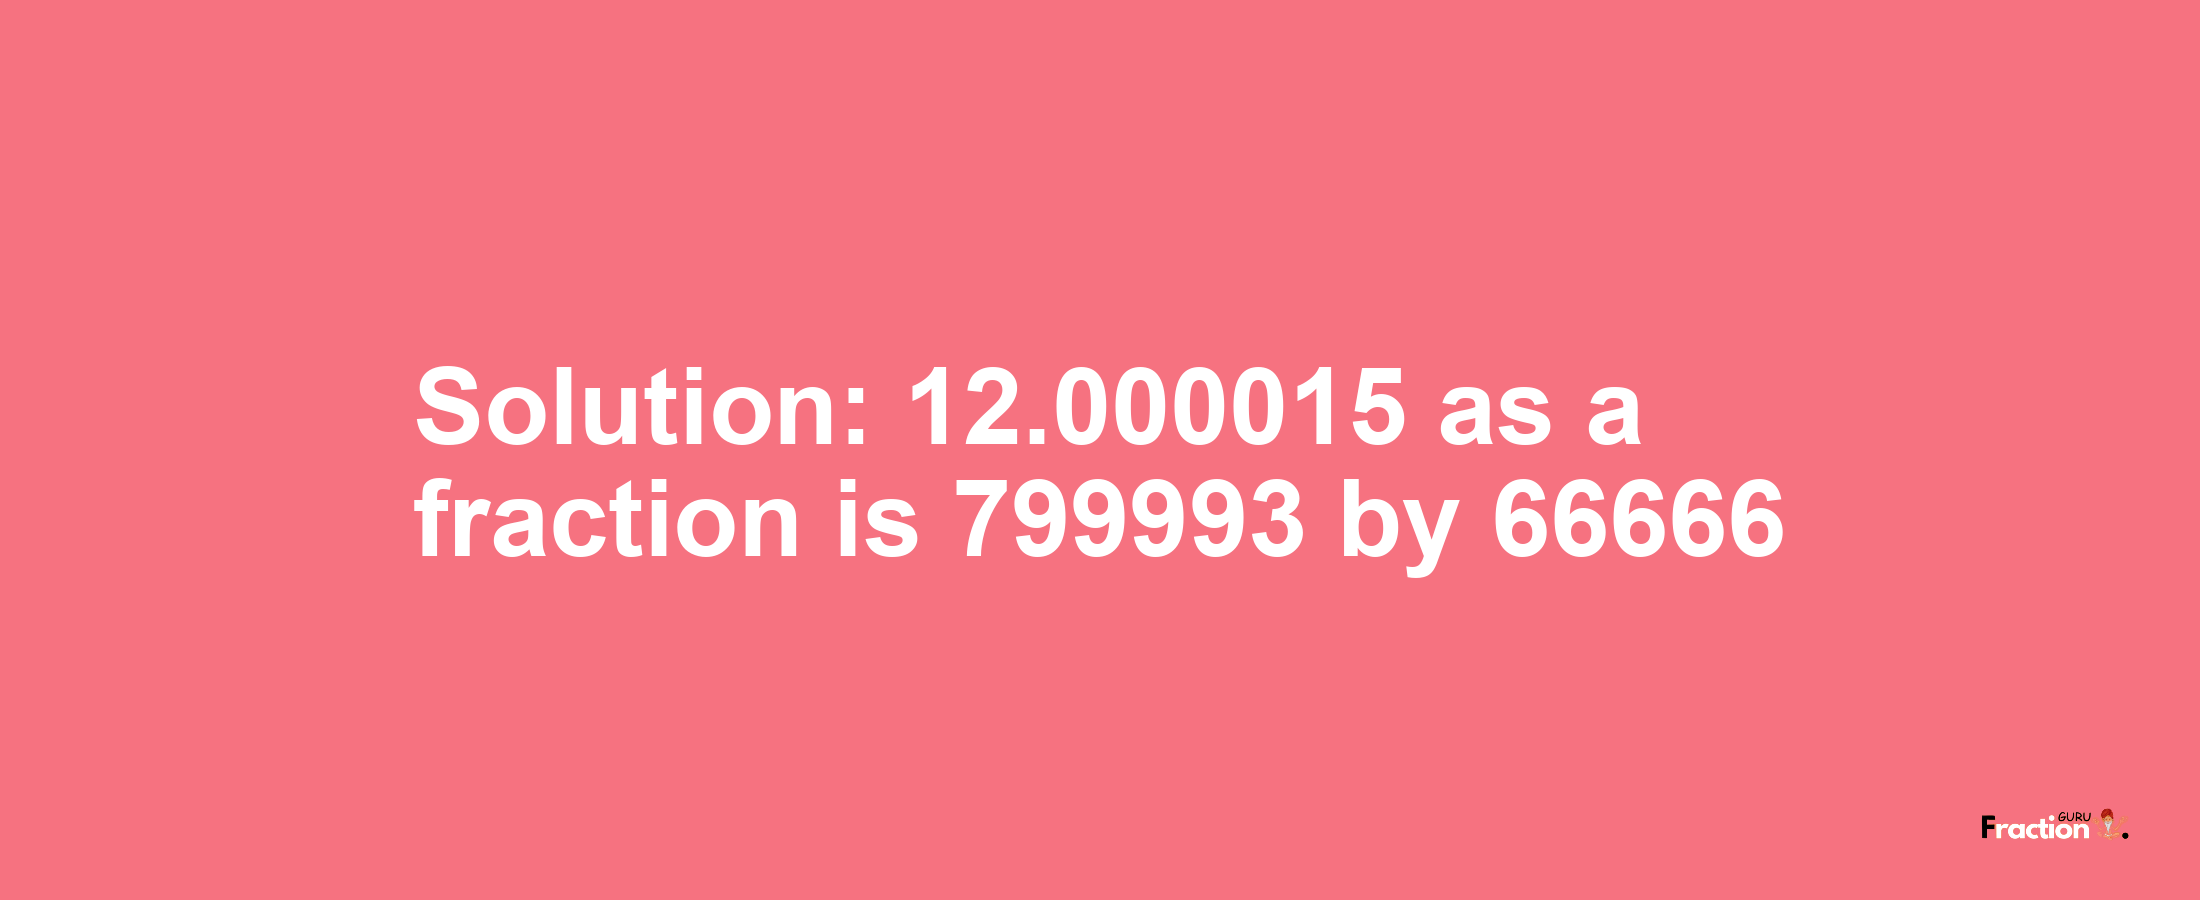 Solution:12.000015 as a fraction is 799993/66666